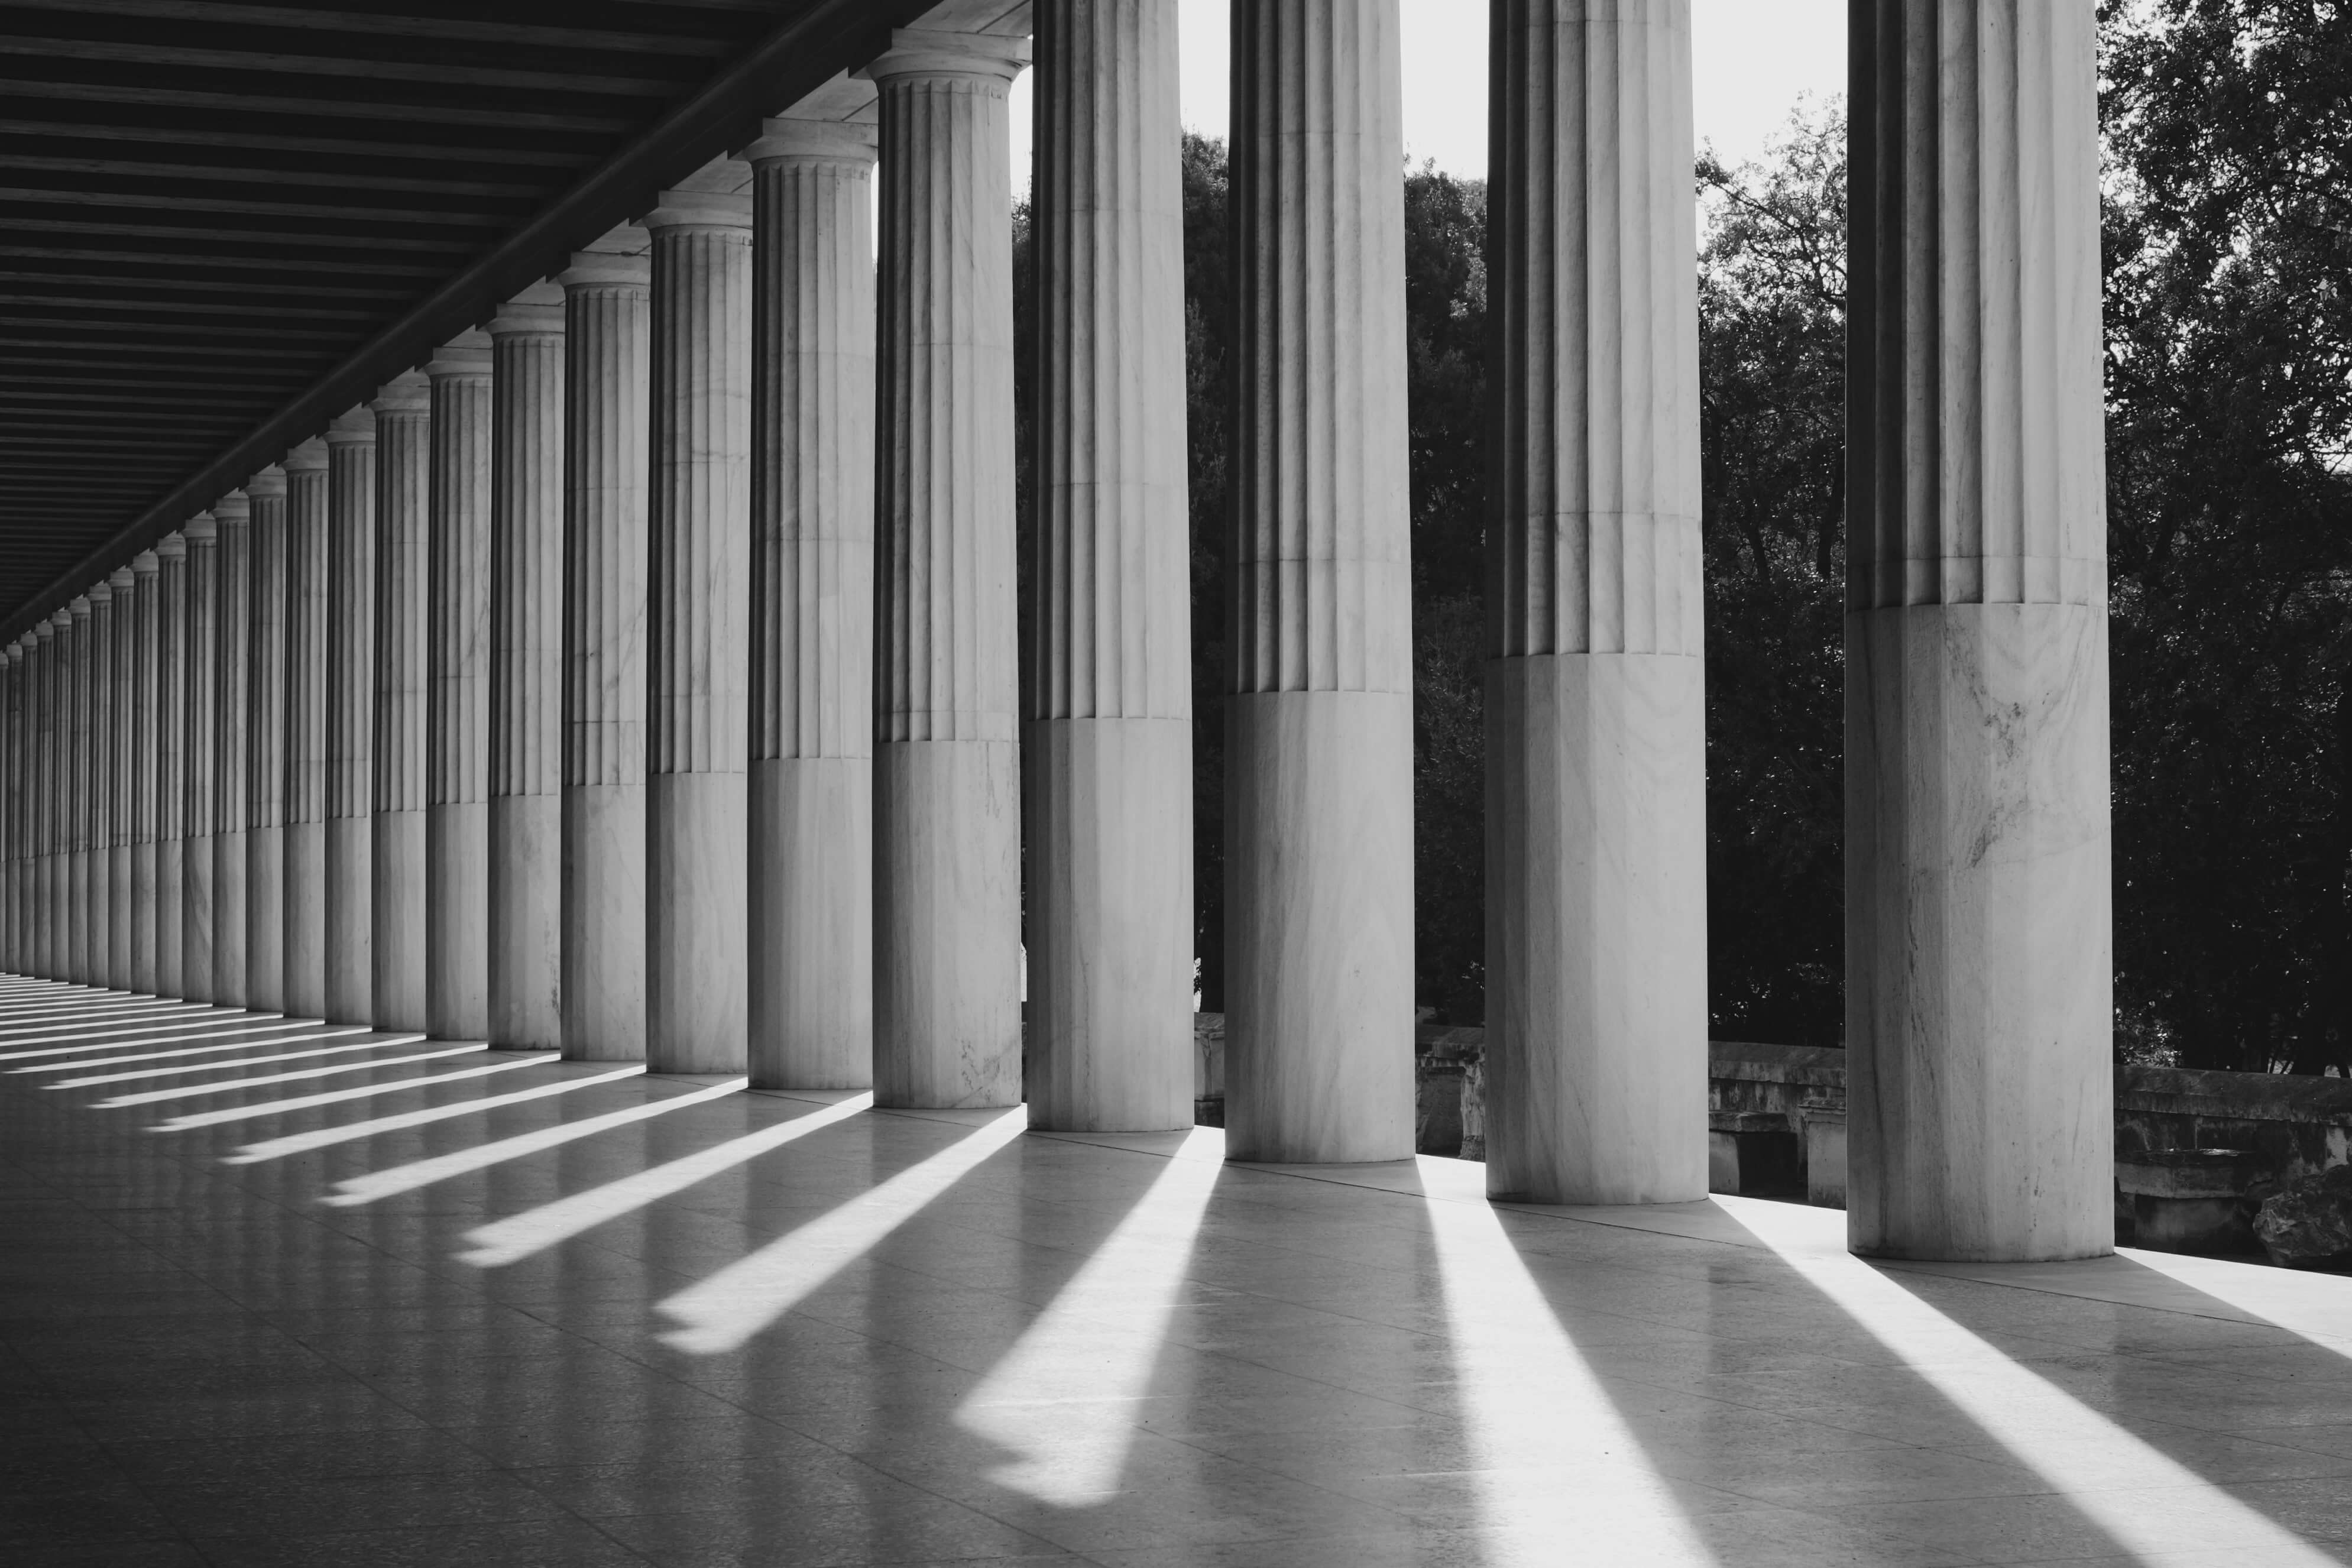 Greek-style columns in black and white